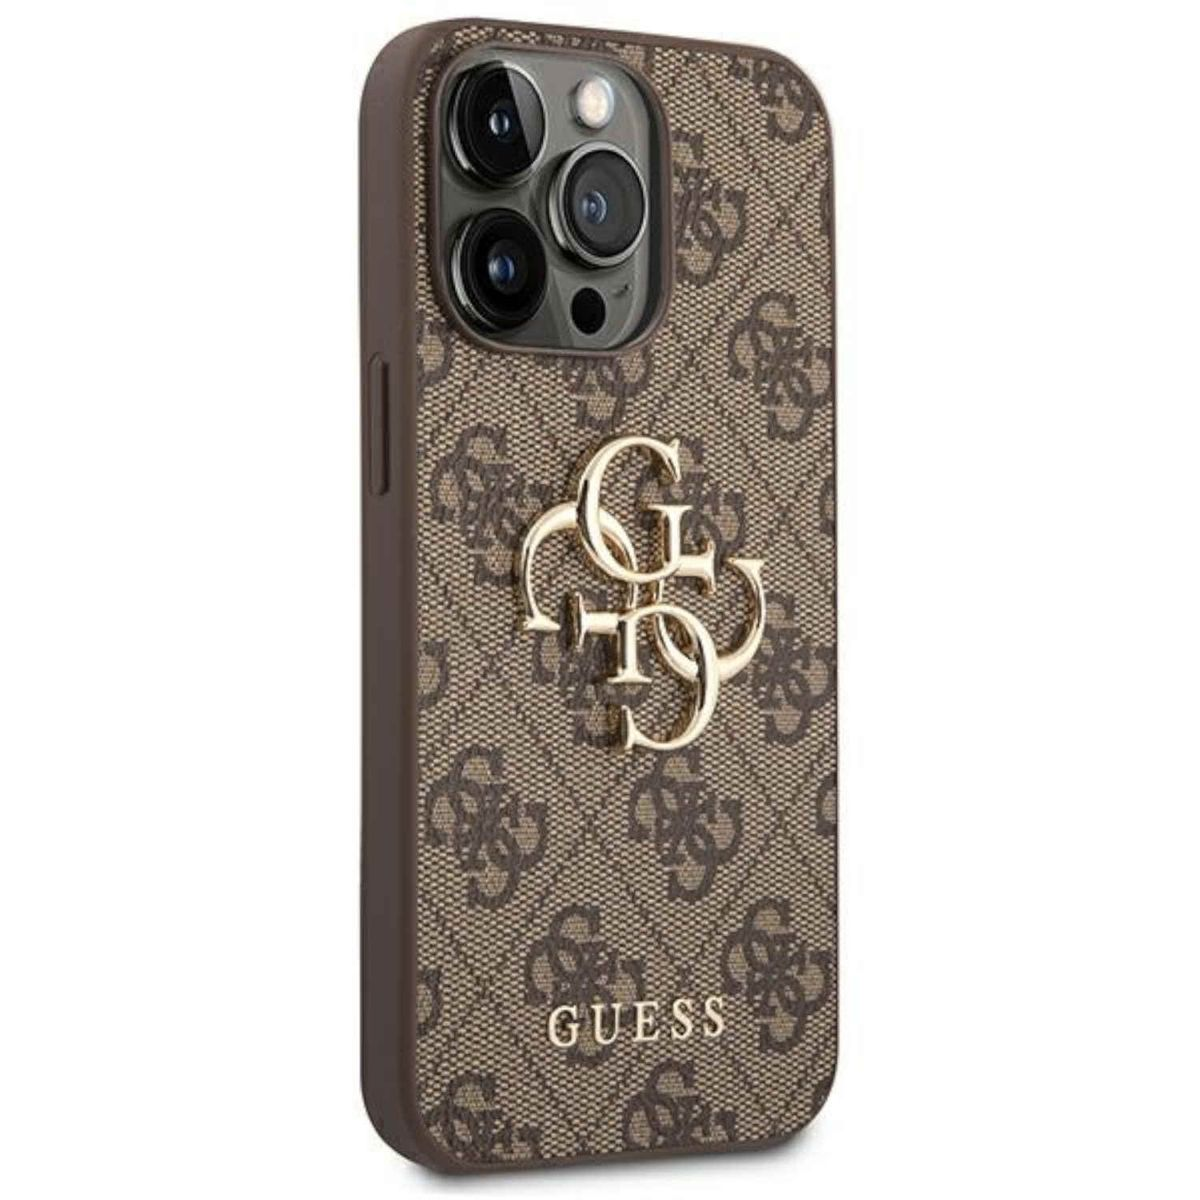 14 Pro, Big iPhone 14 Angabe Pro Logo Apple, Keine GUESS (Brown), Backcover, Case 4G Metal iPhone